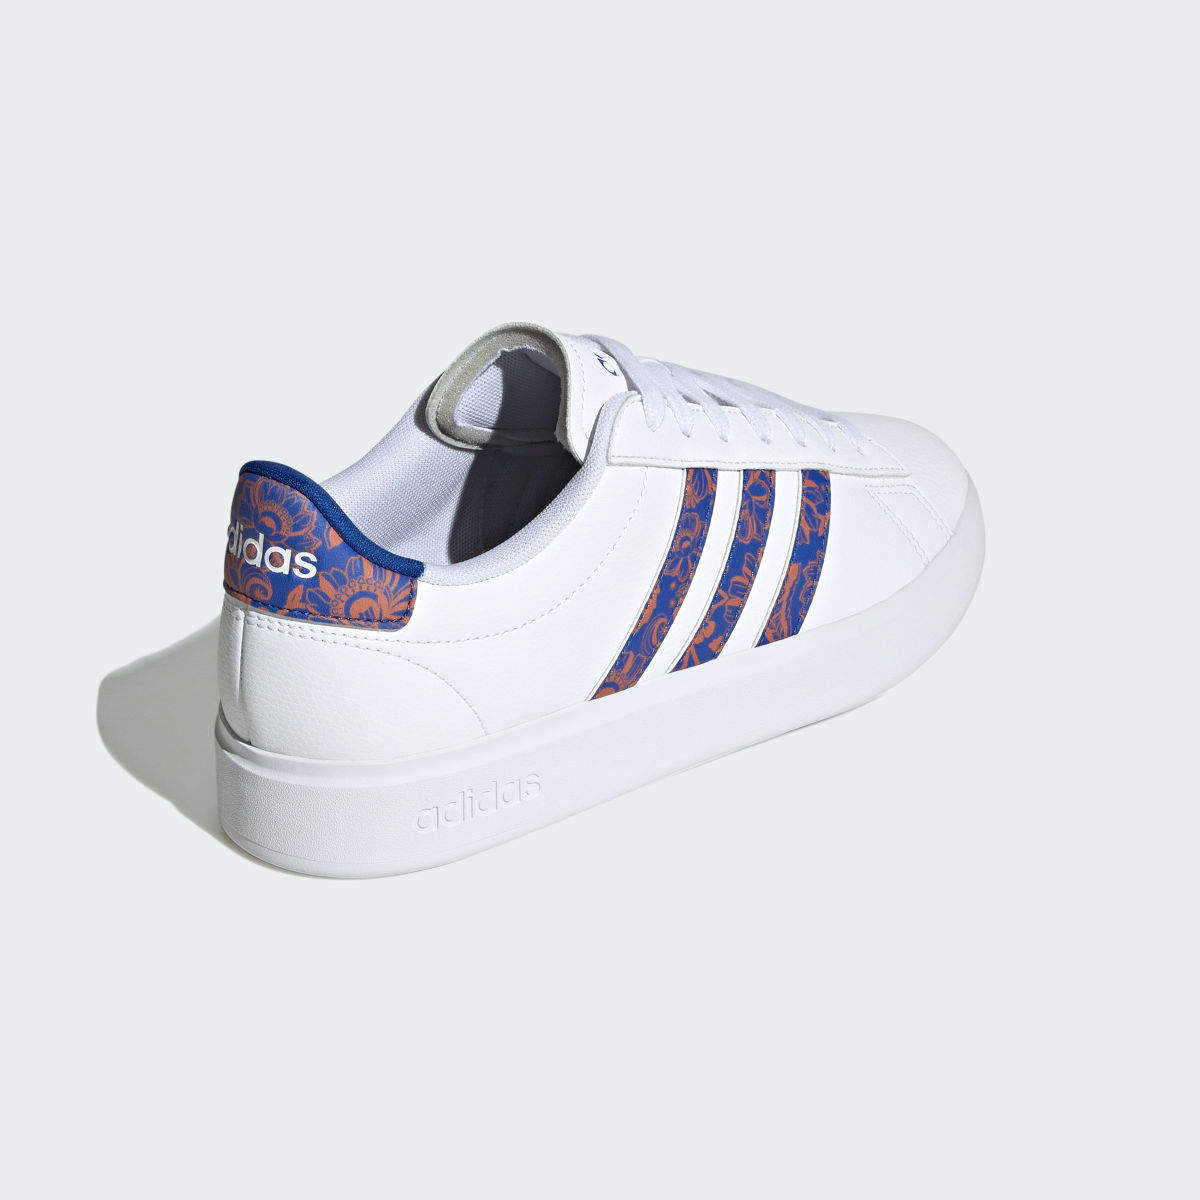 Adidas Grand Court 2.0 Shoes. 6